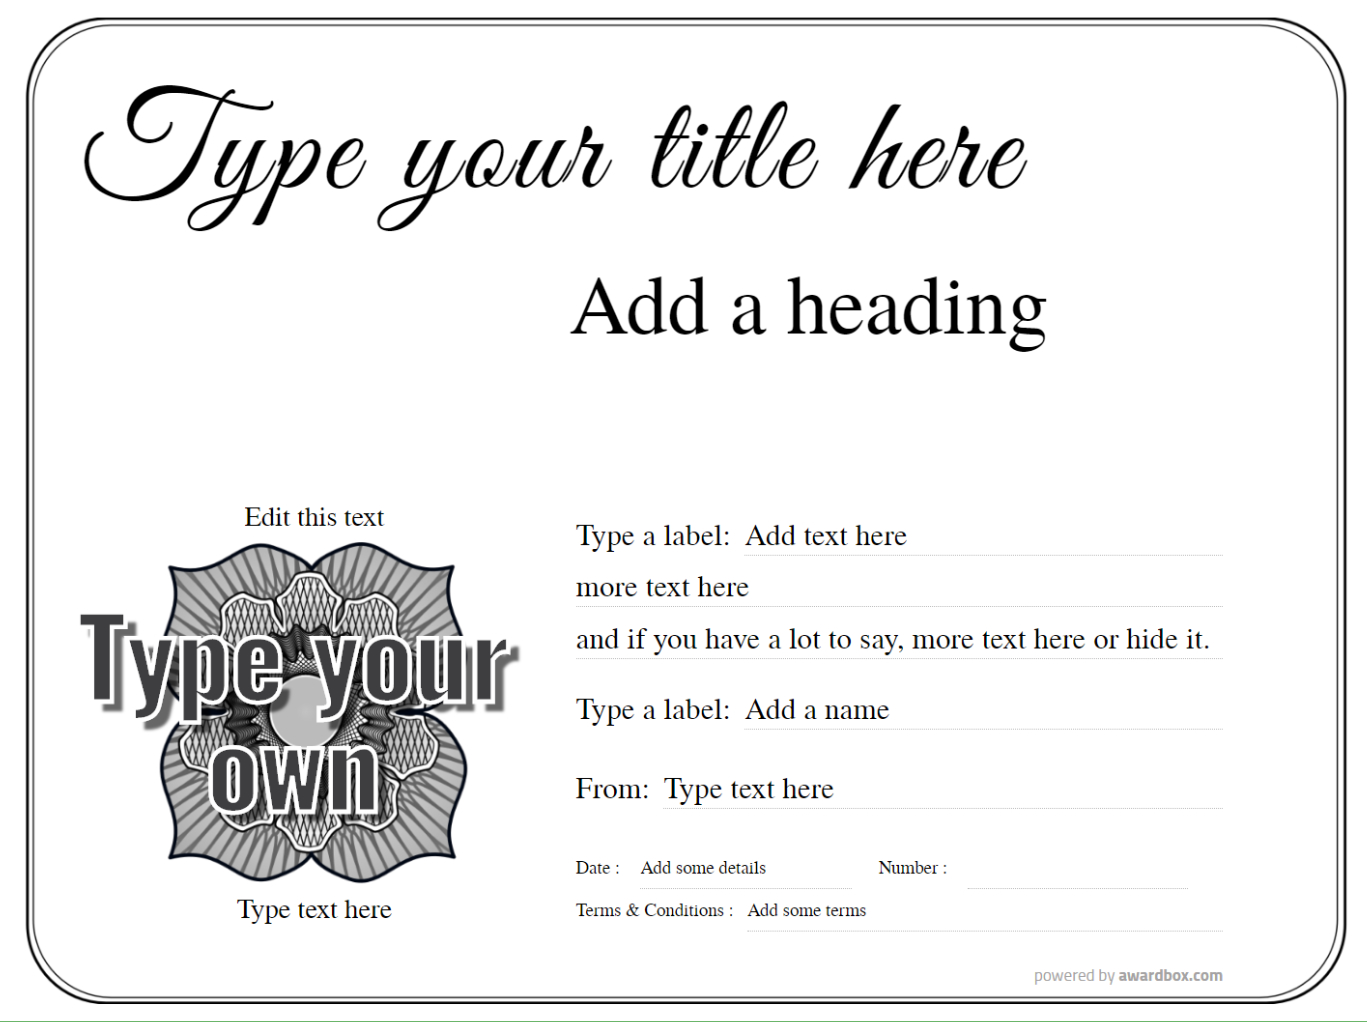 Free Gift Certificate templates and ideas - fully editable Intended For Blank Coupon Template Printable